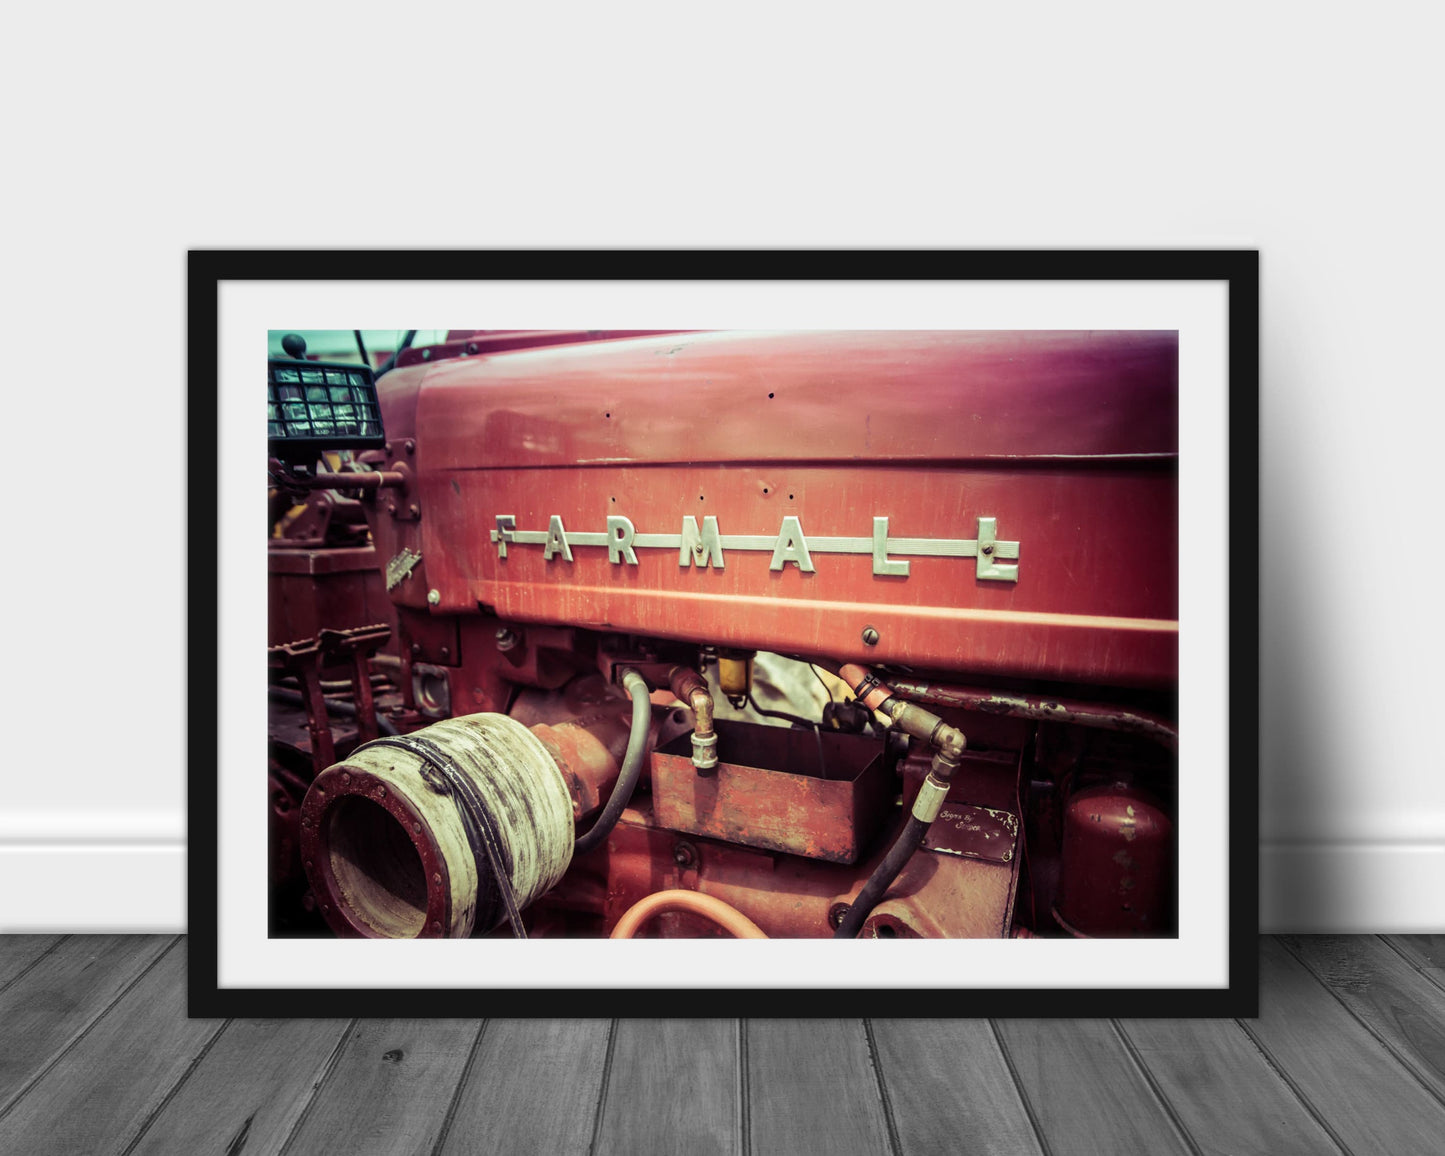 Farmall Tractor Photograph - Tractor Photography, Americana Photography, Farmhouse Photography, Metal Wall Art, Office Wall Art